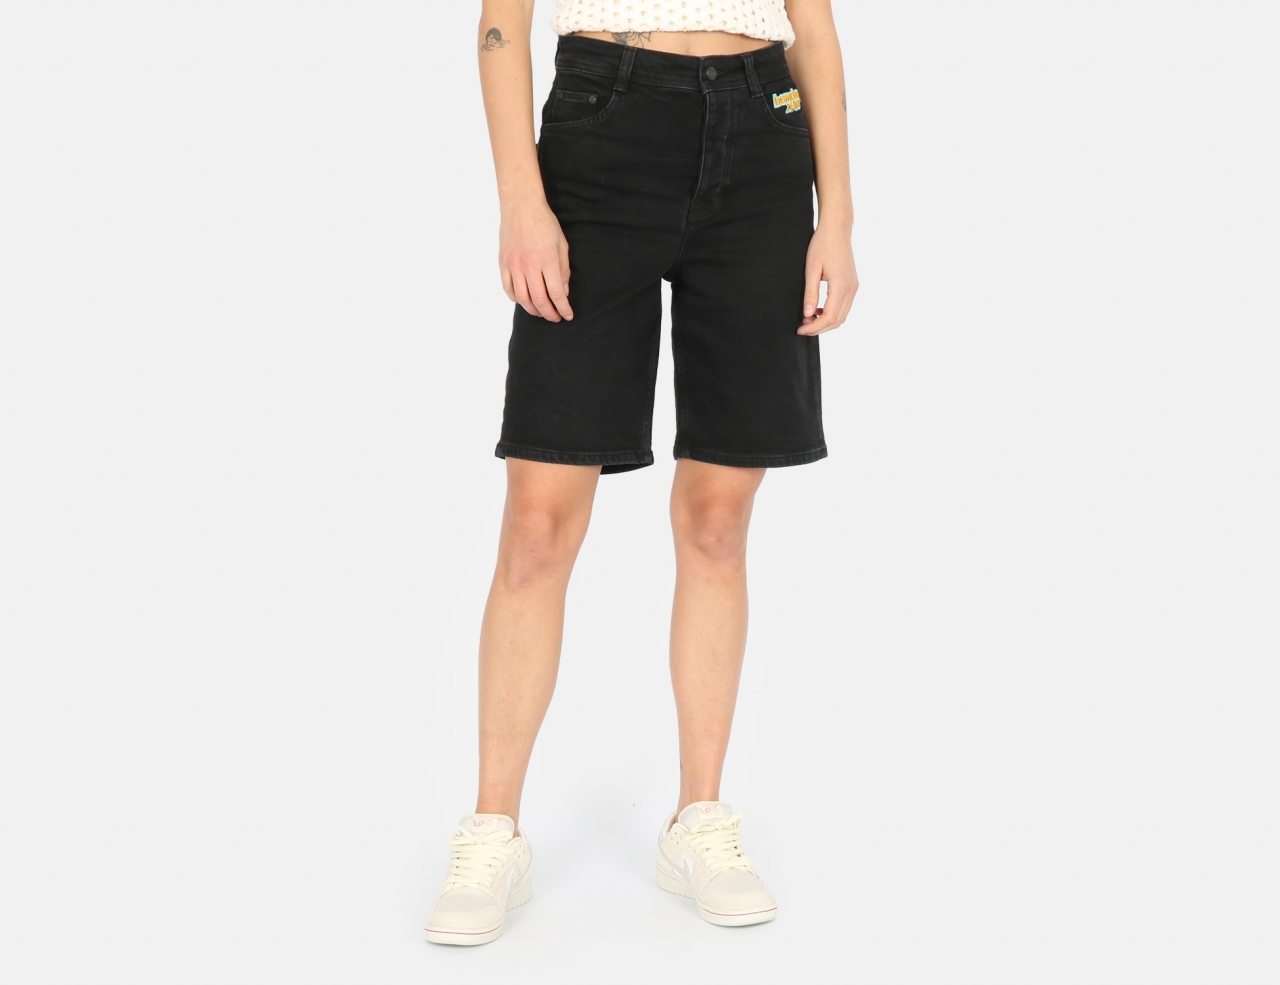 Homeboy x-tra Baggy Shorts - Washed Black